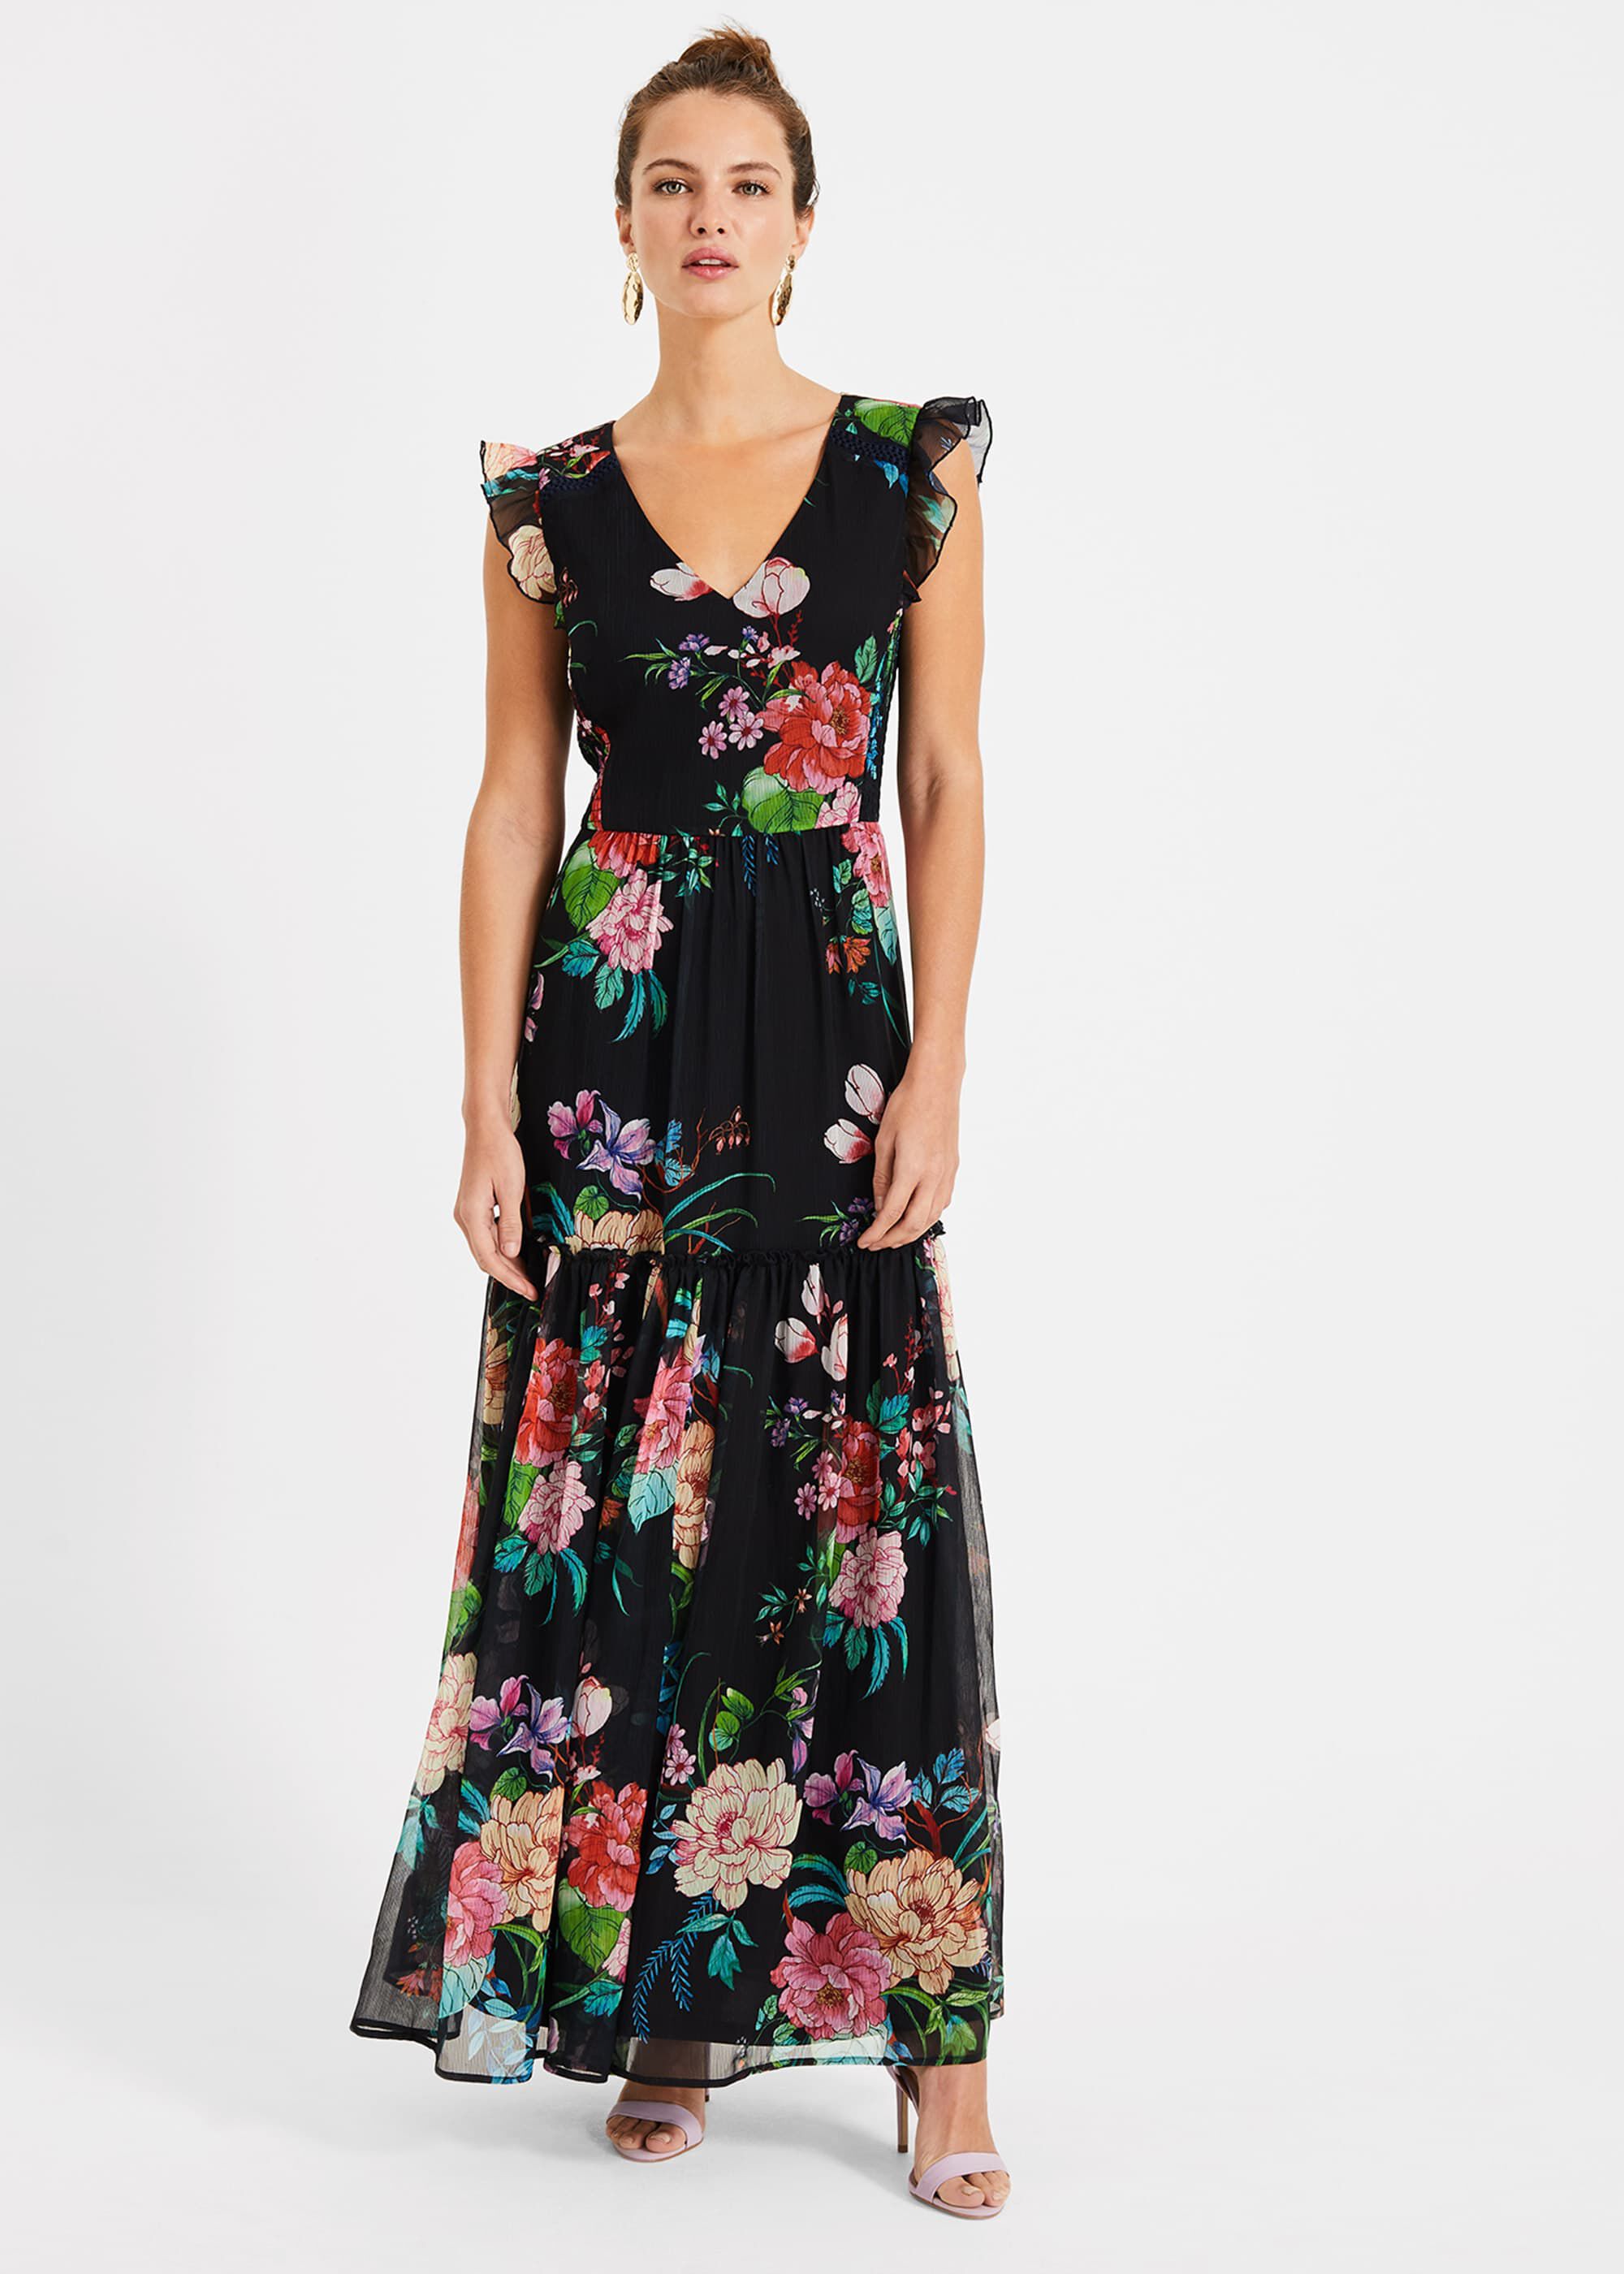 Isadora Floral Maxi Dress | Phase Eight